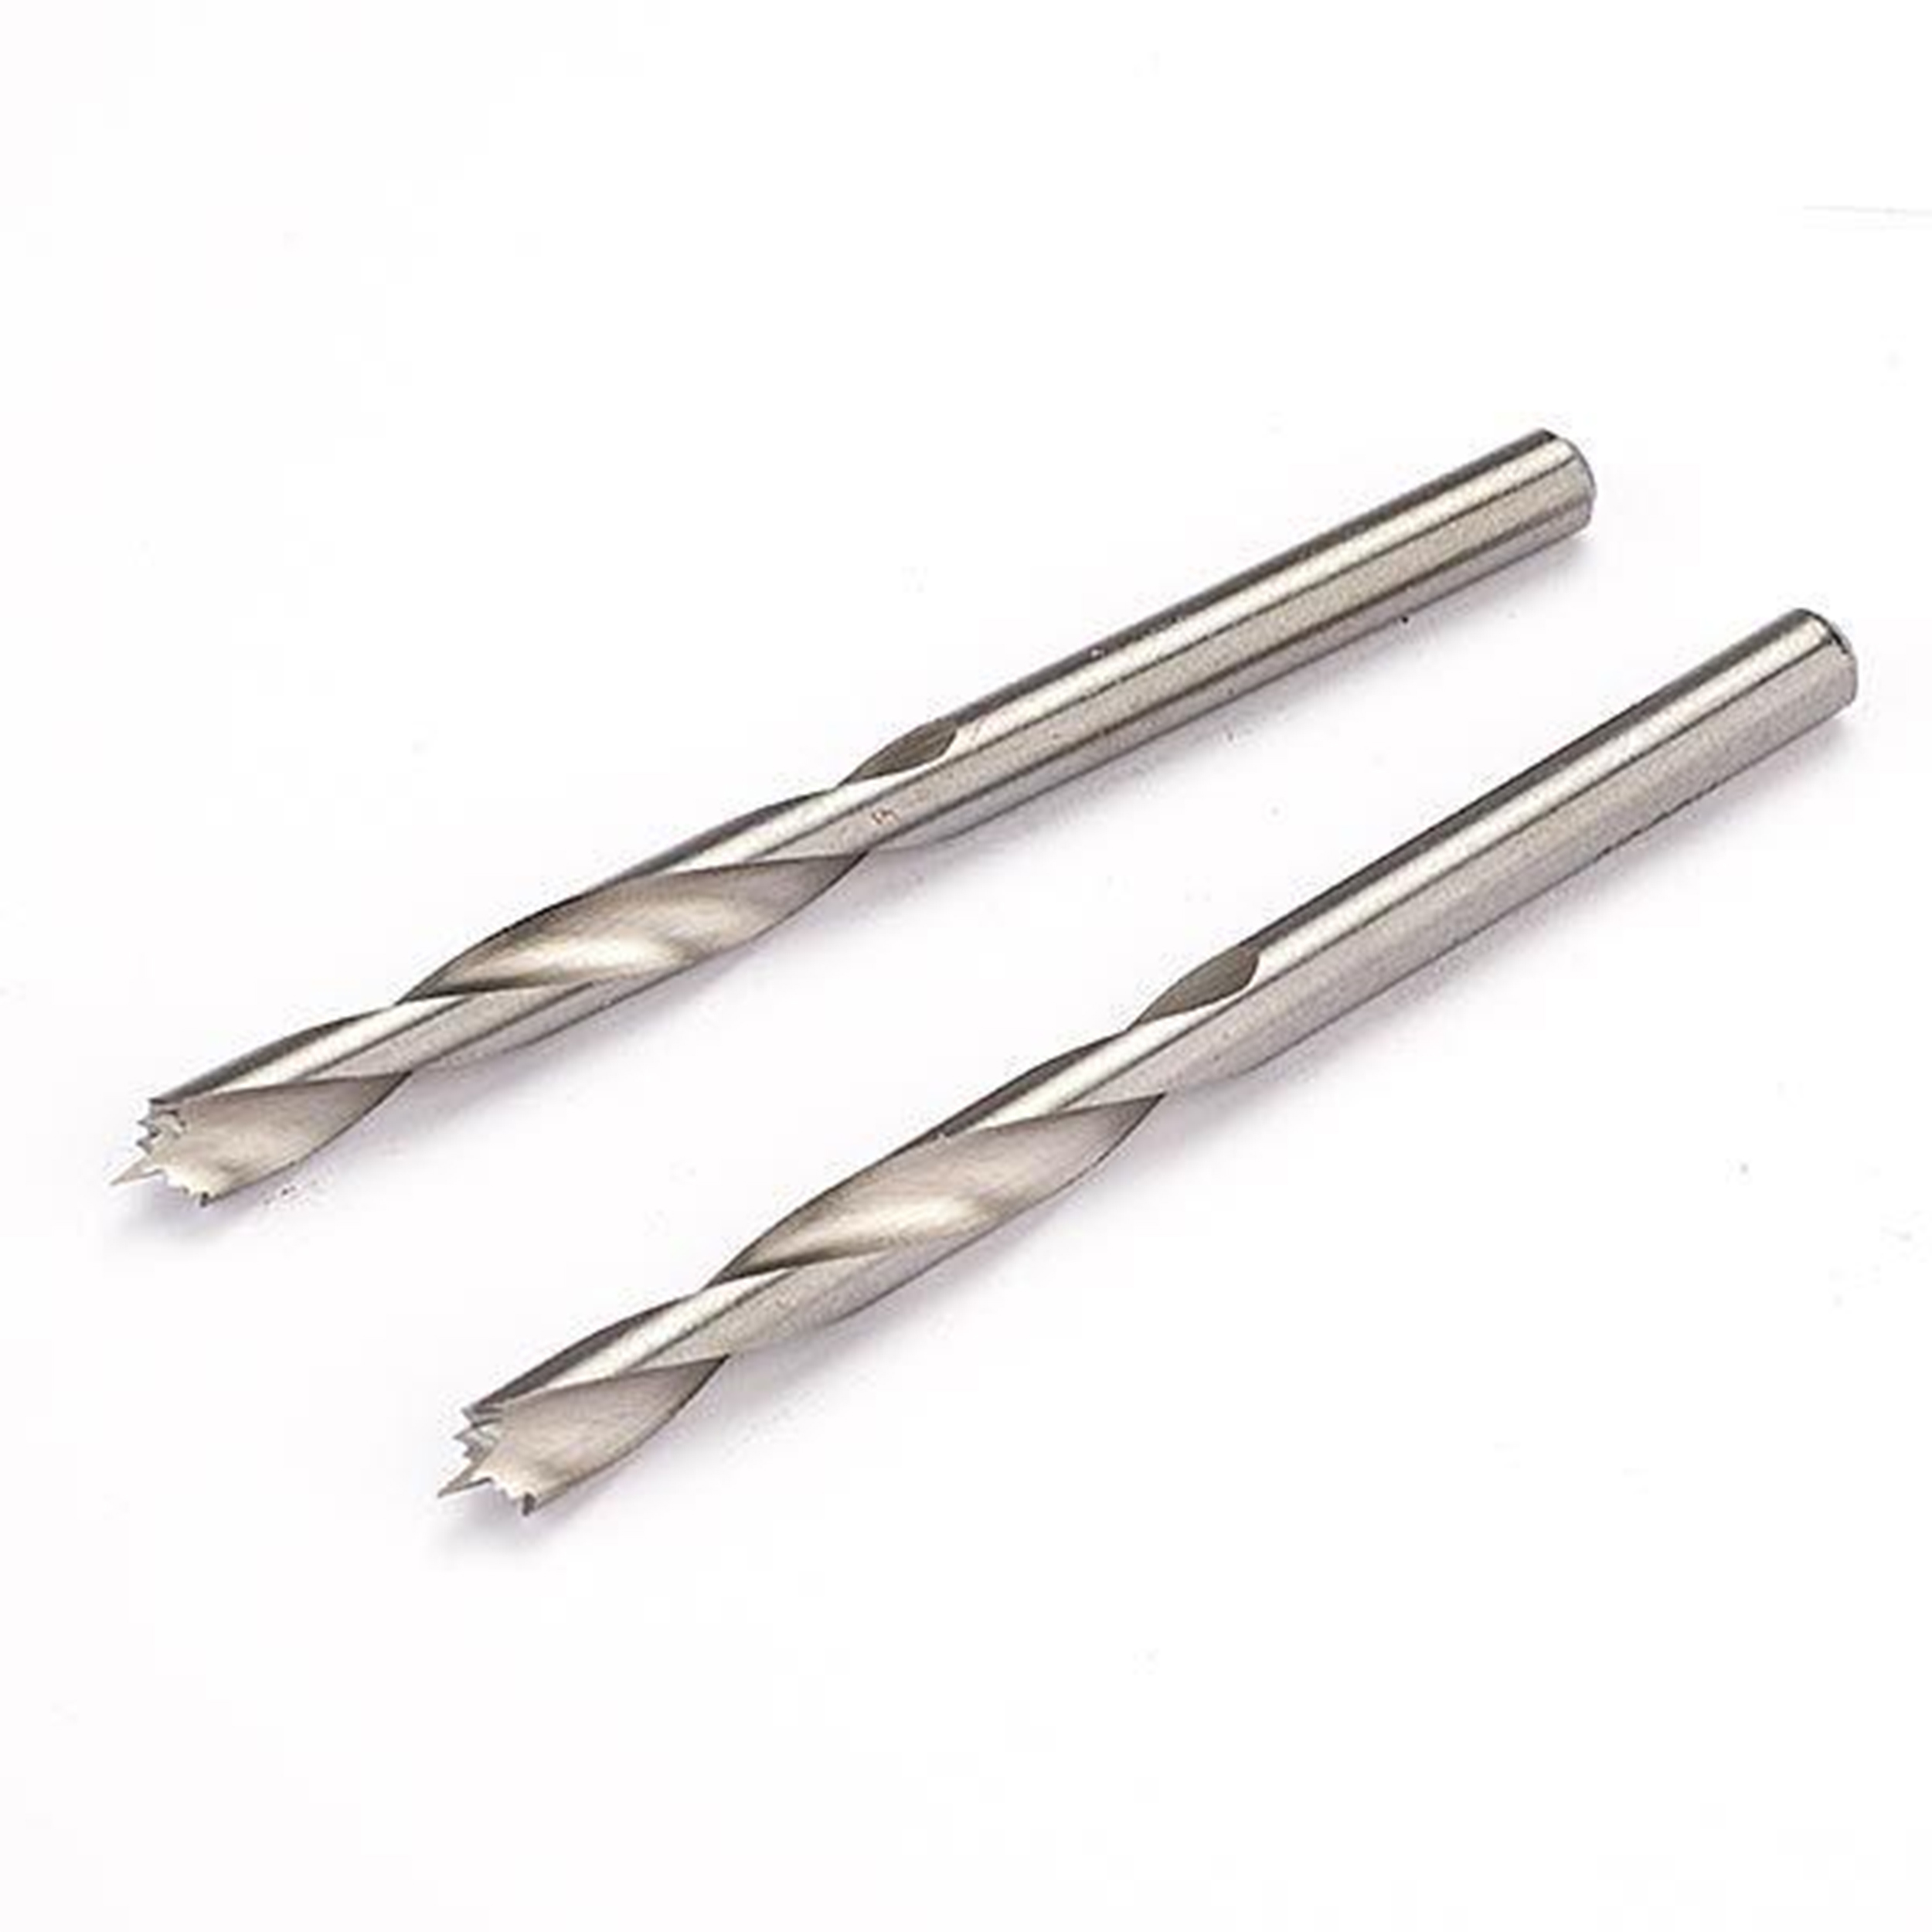 5mm Replacement Bits For Woodriver Shelf Pin Jig Drill Bit 2-pieces